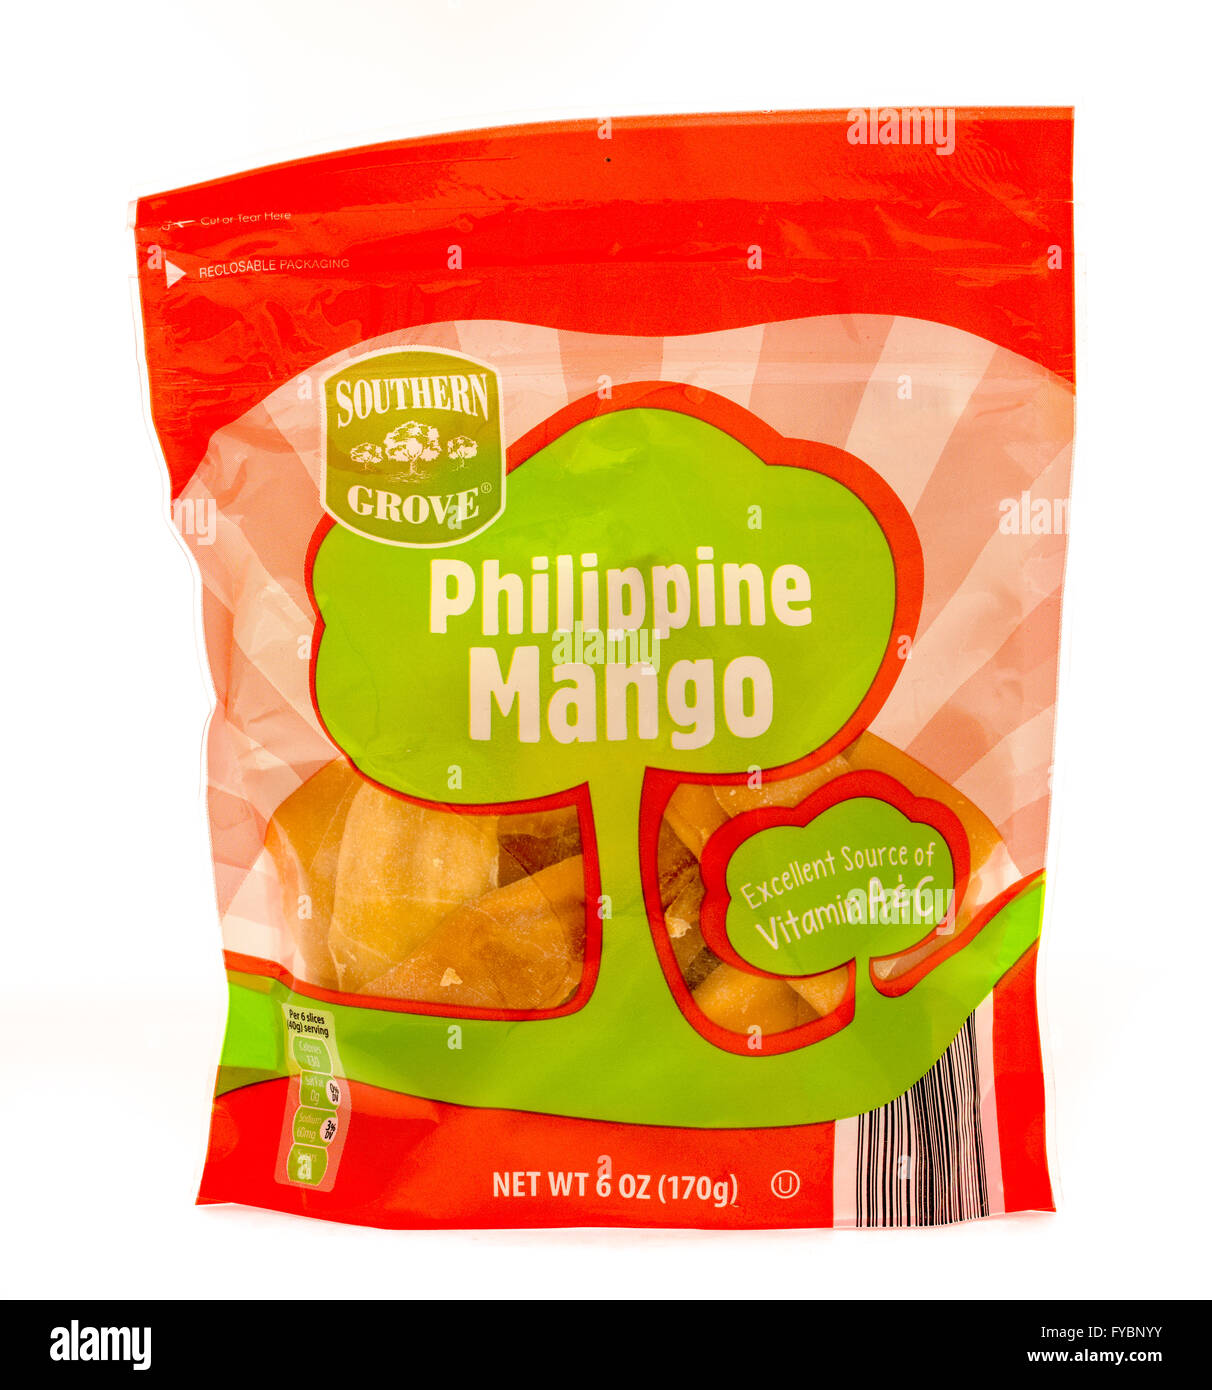 Winneconne, WI - 27 Sept 2015:  Package of Philippine mango made by Southern Grove. Stock Photo